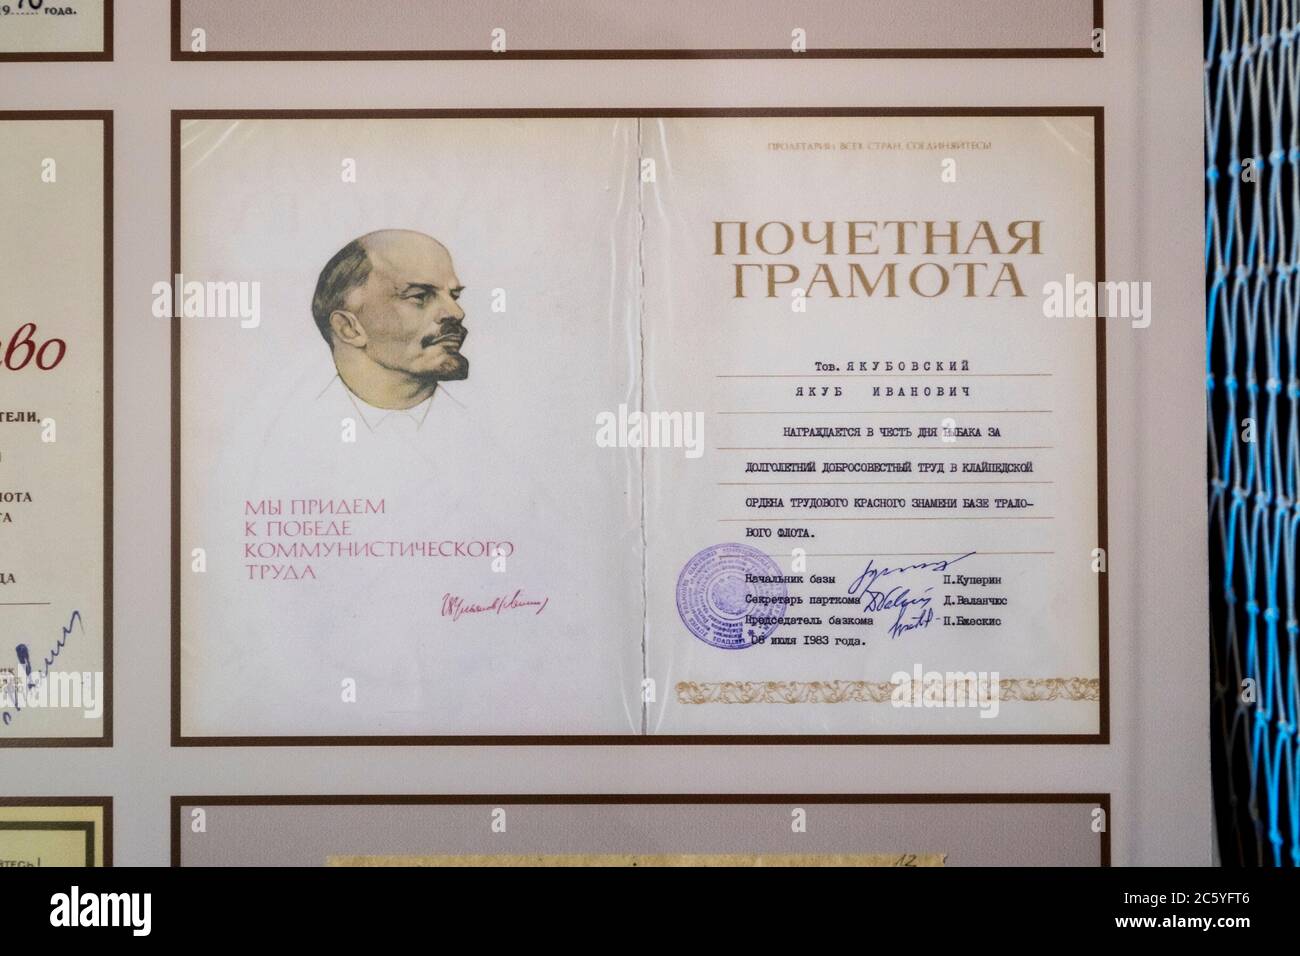 A Soviet, USSR, CCCP award certificate. At the Ethnographic Homestead Complex in Neringa, Lithuania. Stock Photo